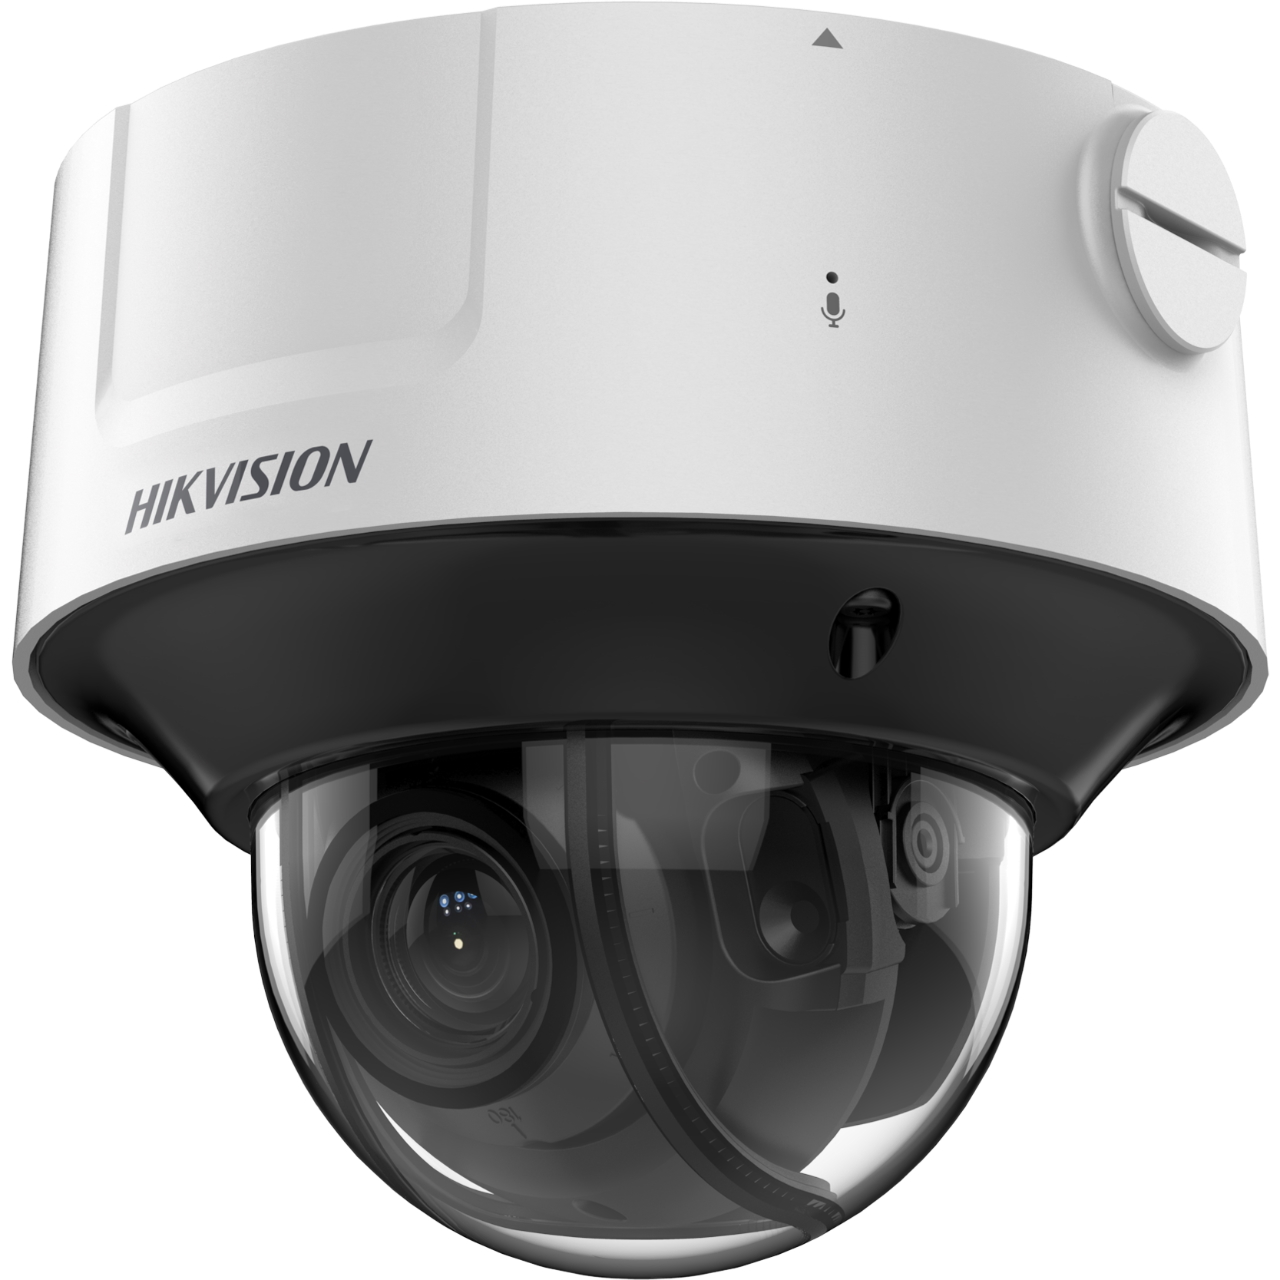 20000660 Hikvision DeeipinView camera dome 8MP , VF, 2.8-12mm